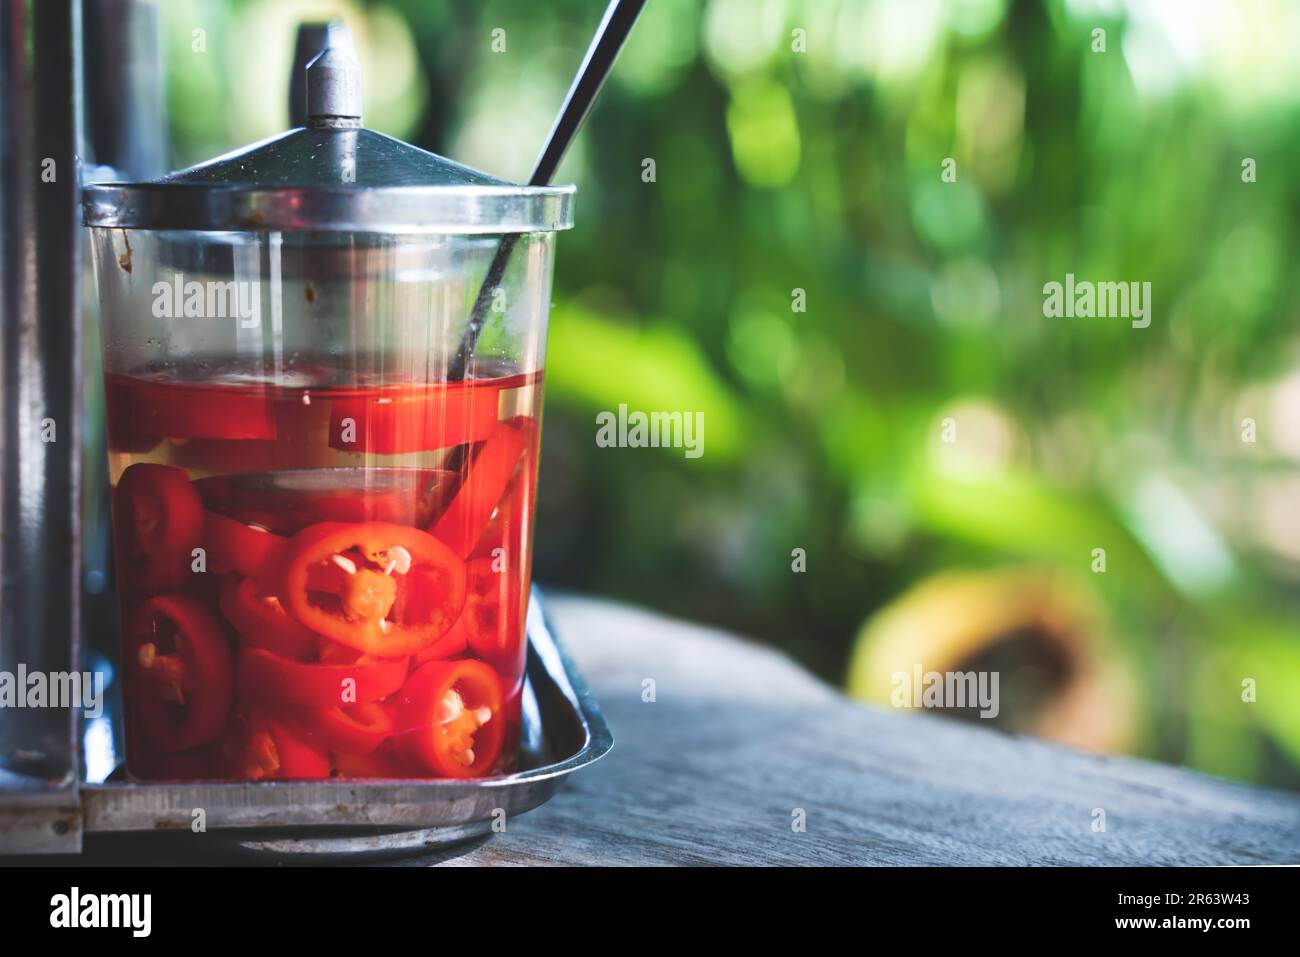 Pickled sliced chillies in a glas with tropical sunny setting in an Asian restaurant as an ingredient for spicing up your dish Stock Photo